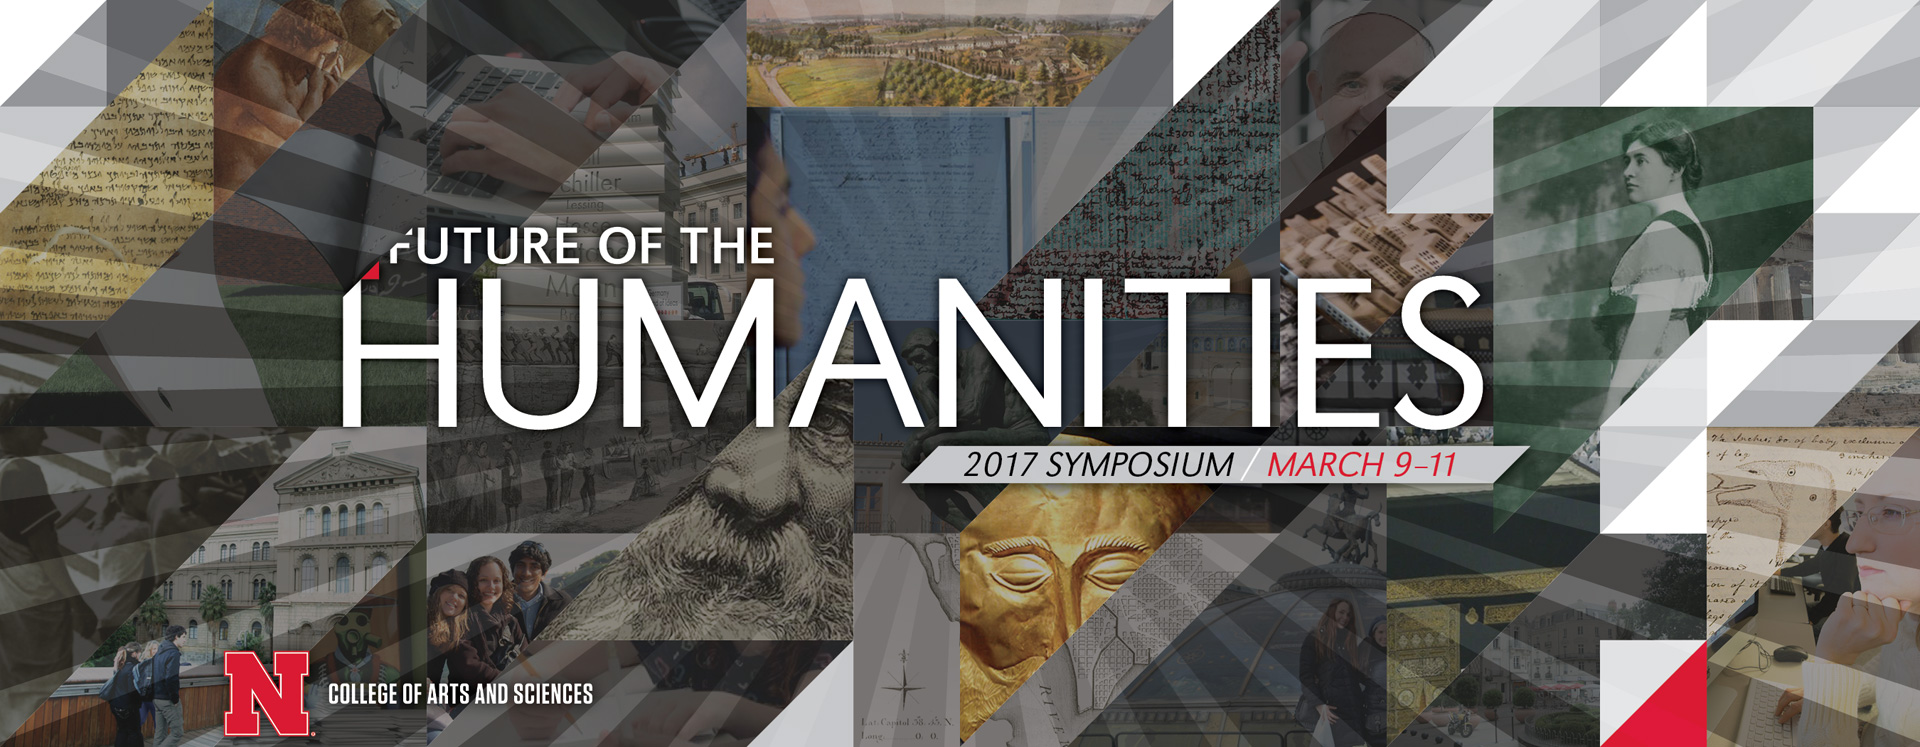 Photo Credit: Future of the Humanities Symposium